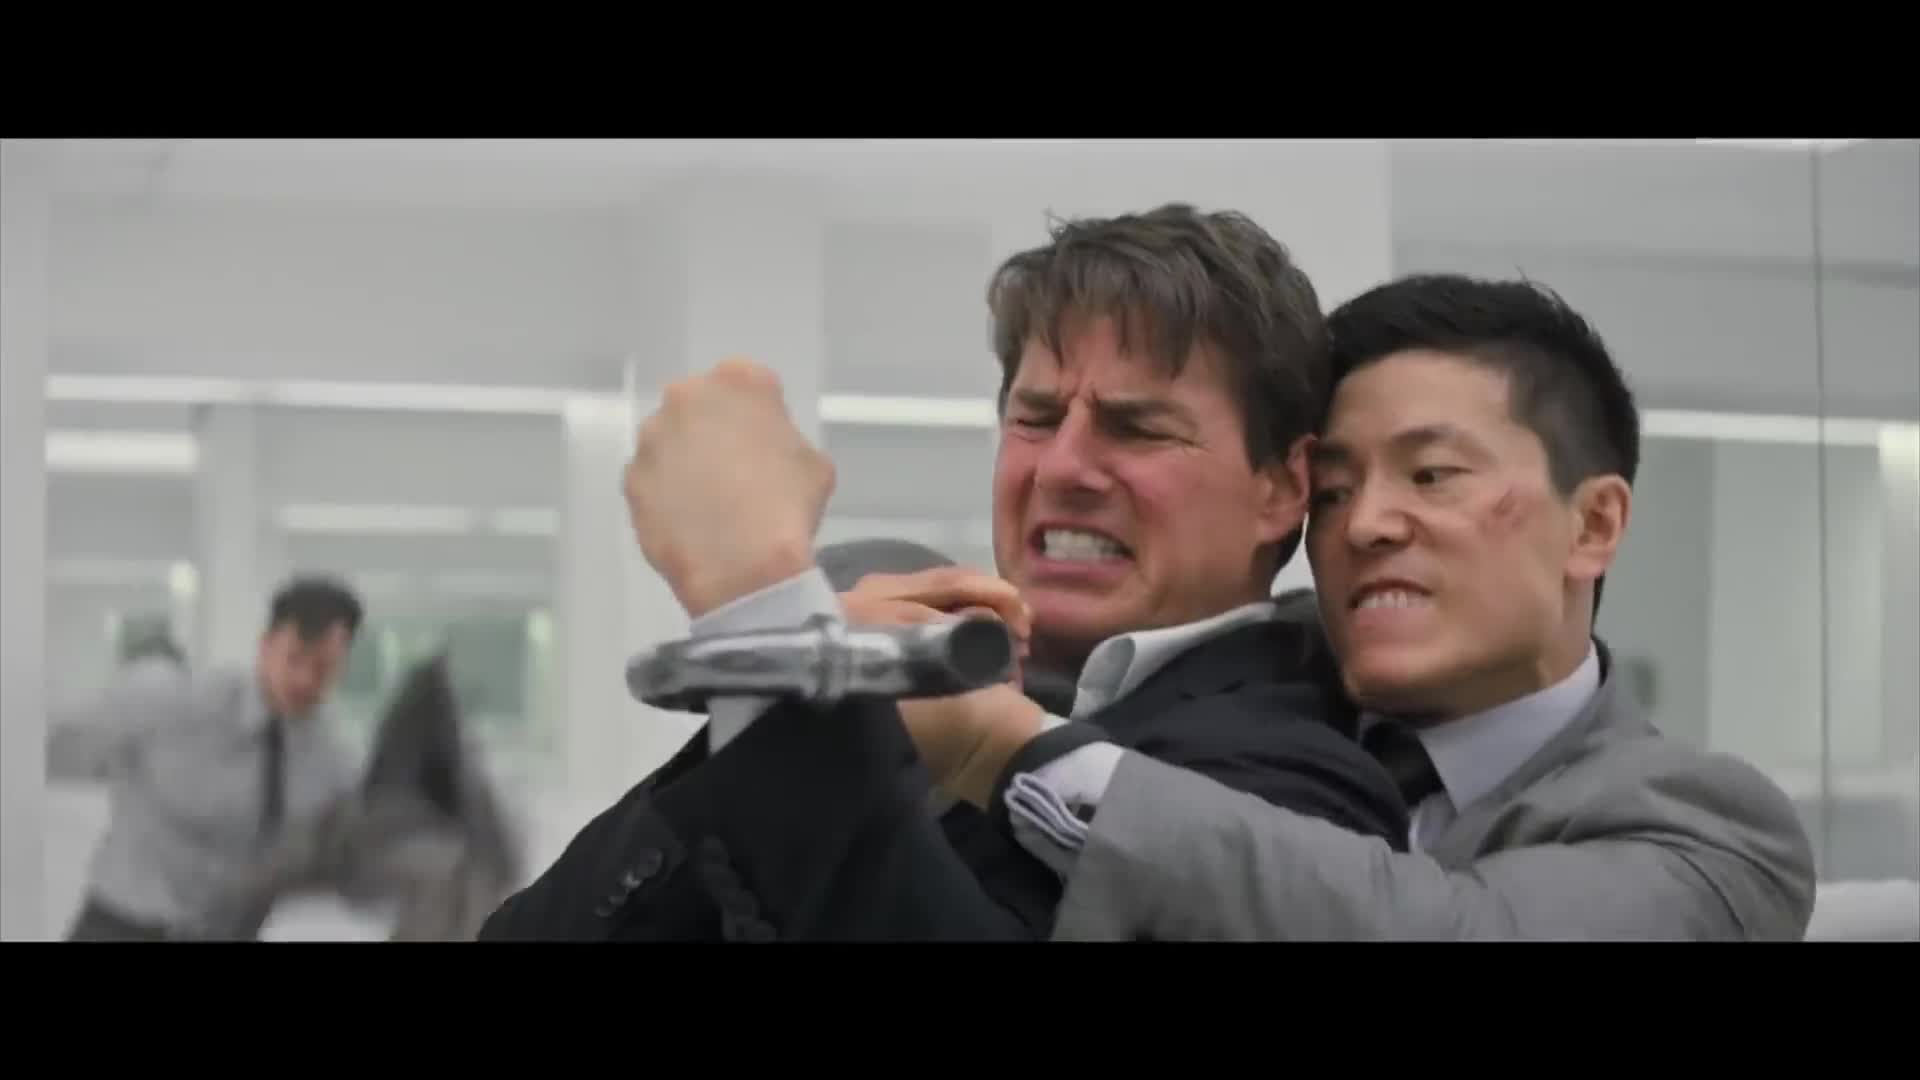 Mission: Impossible - Fallout (2018) - souboj na toaletách